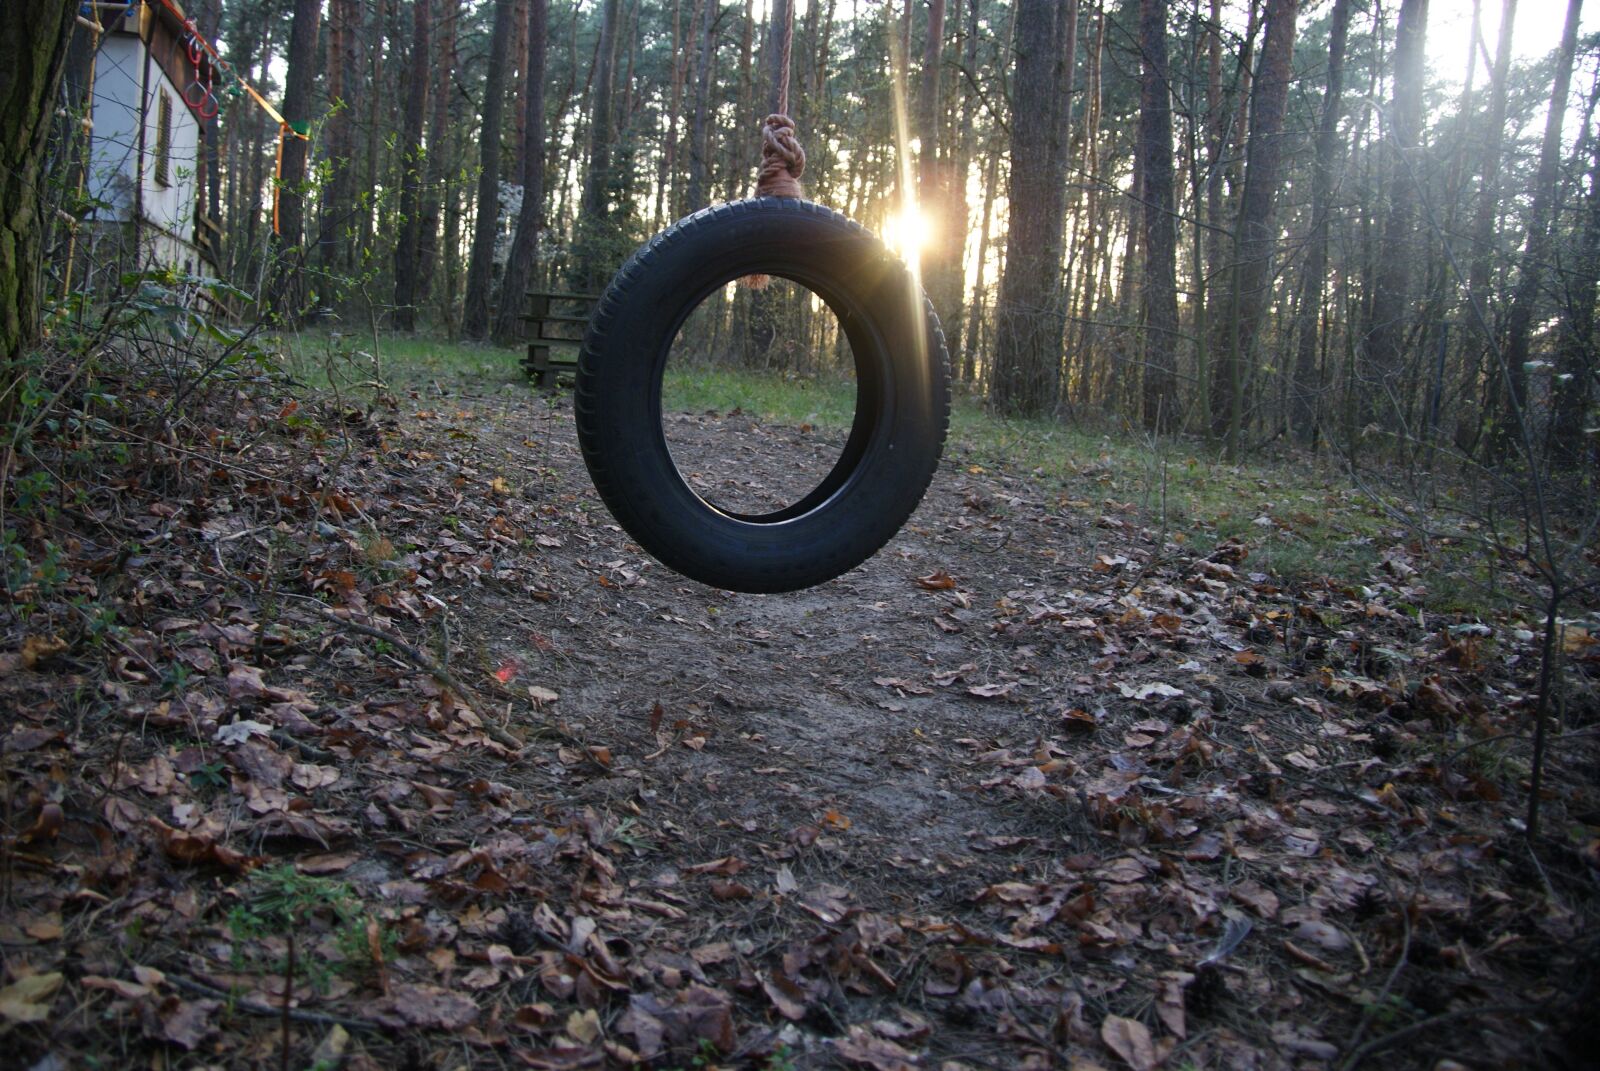 Sony Alpha DSLR-A330 sample photo. Forest, tire, nature photography